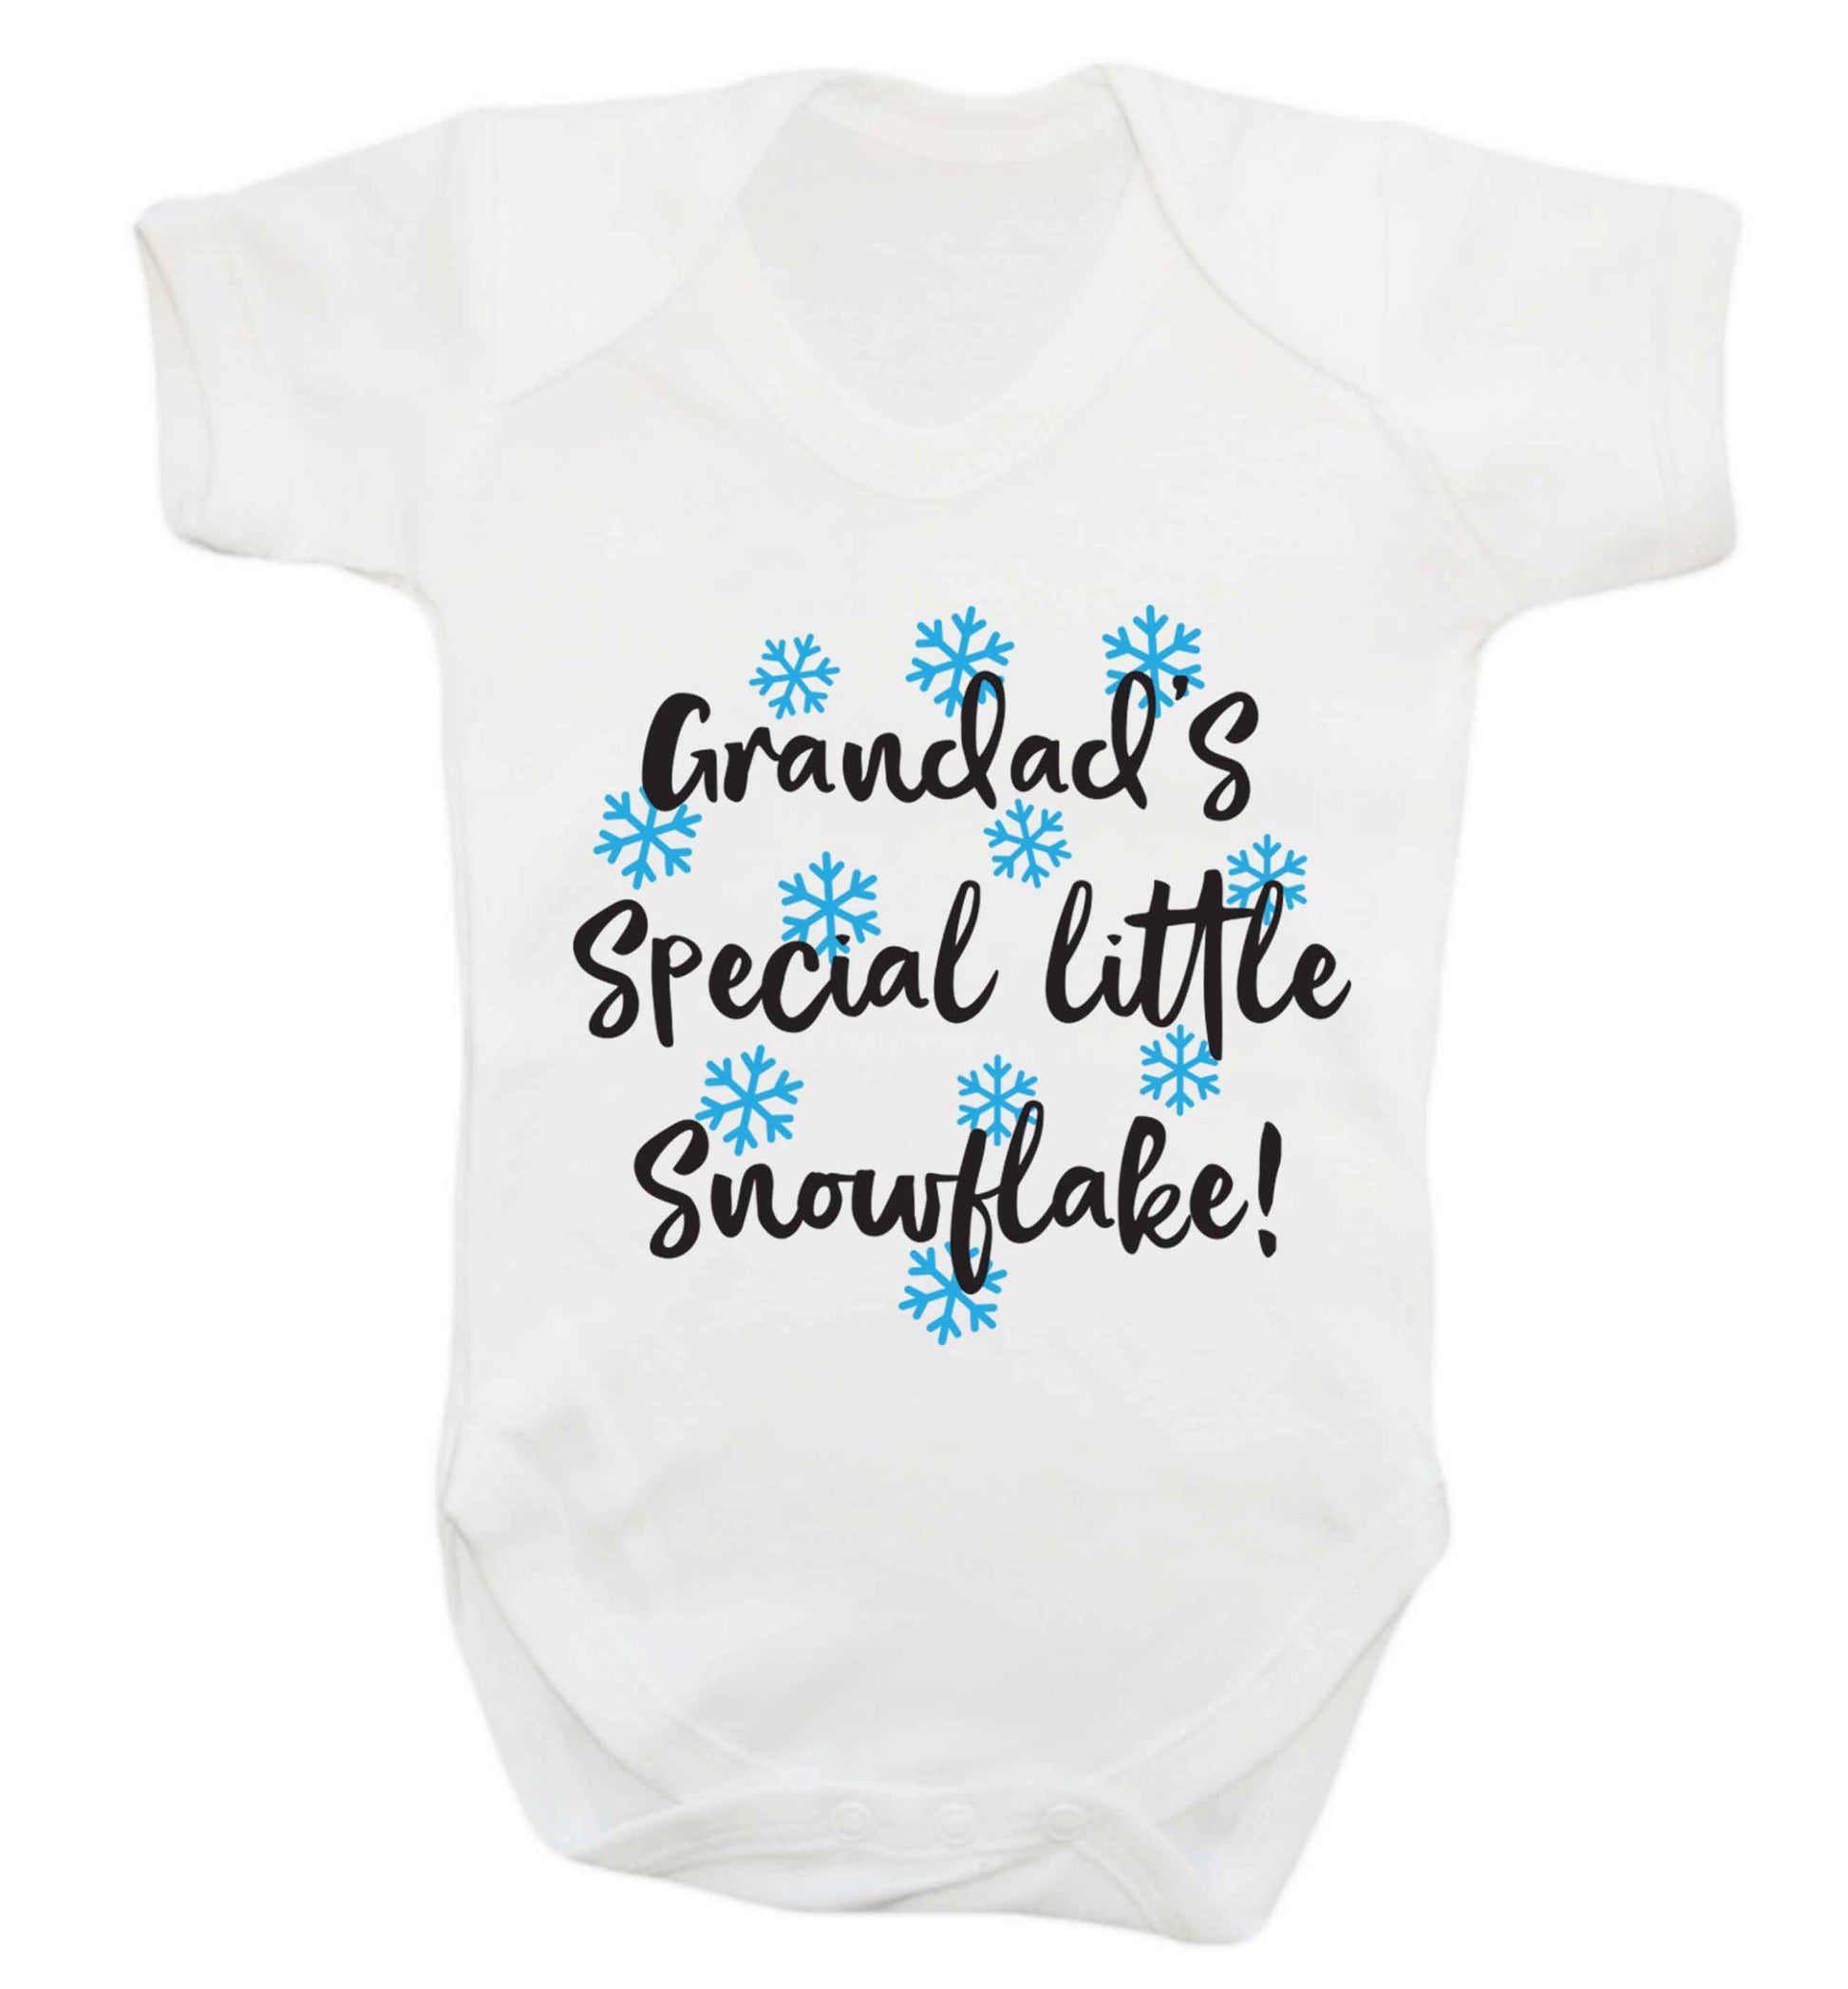 Grandad's special little snowflake Baby Vest white 18-24 months